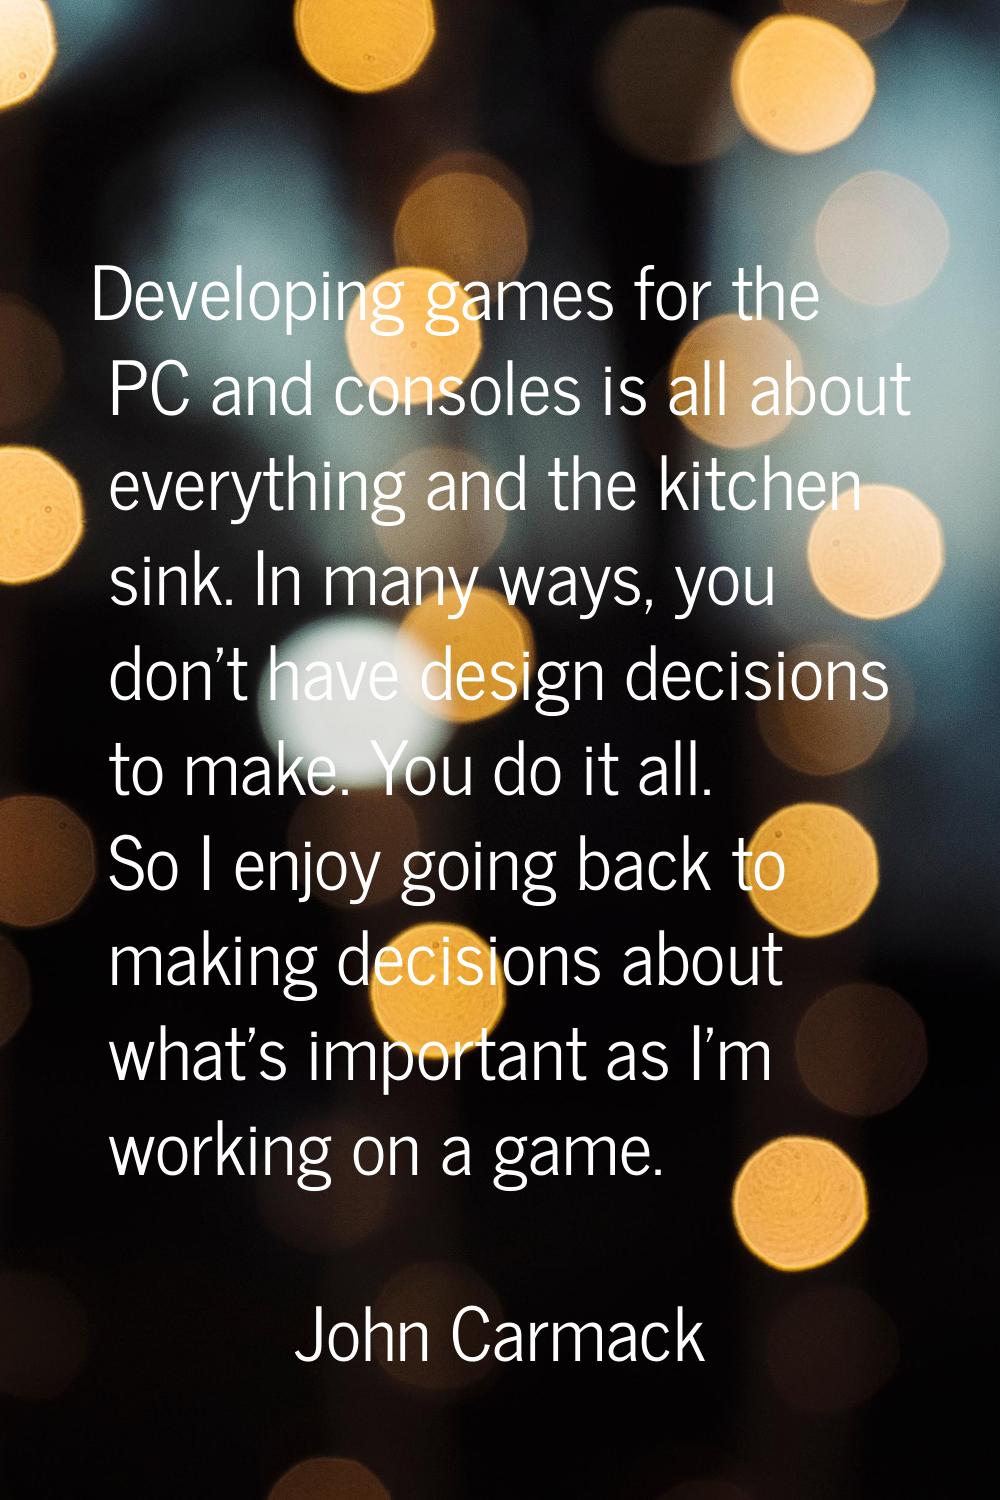 Developing games for the PC and consoles is all about everything and the kitchen sink. In many ways